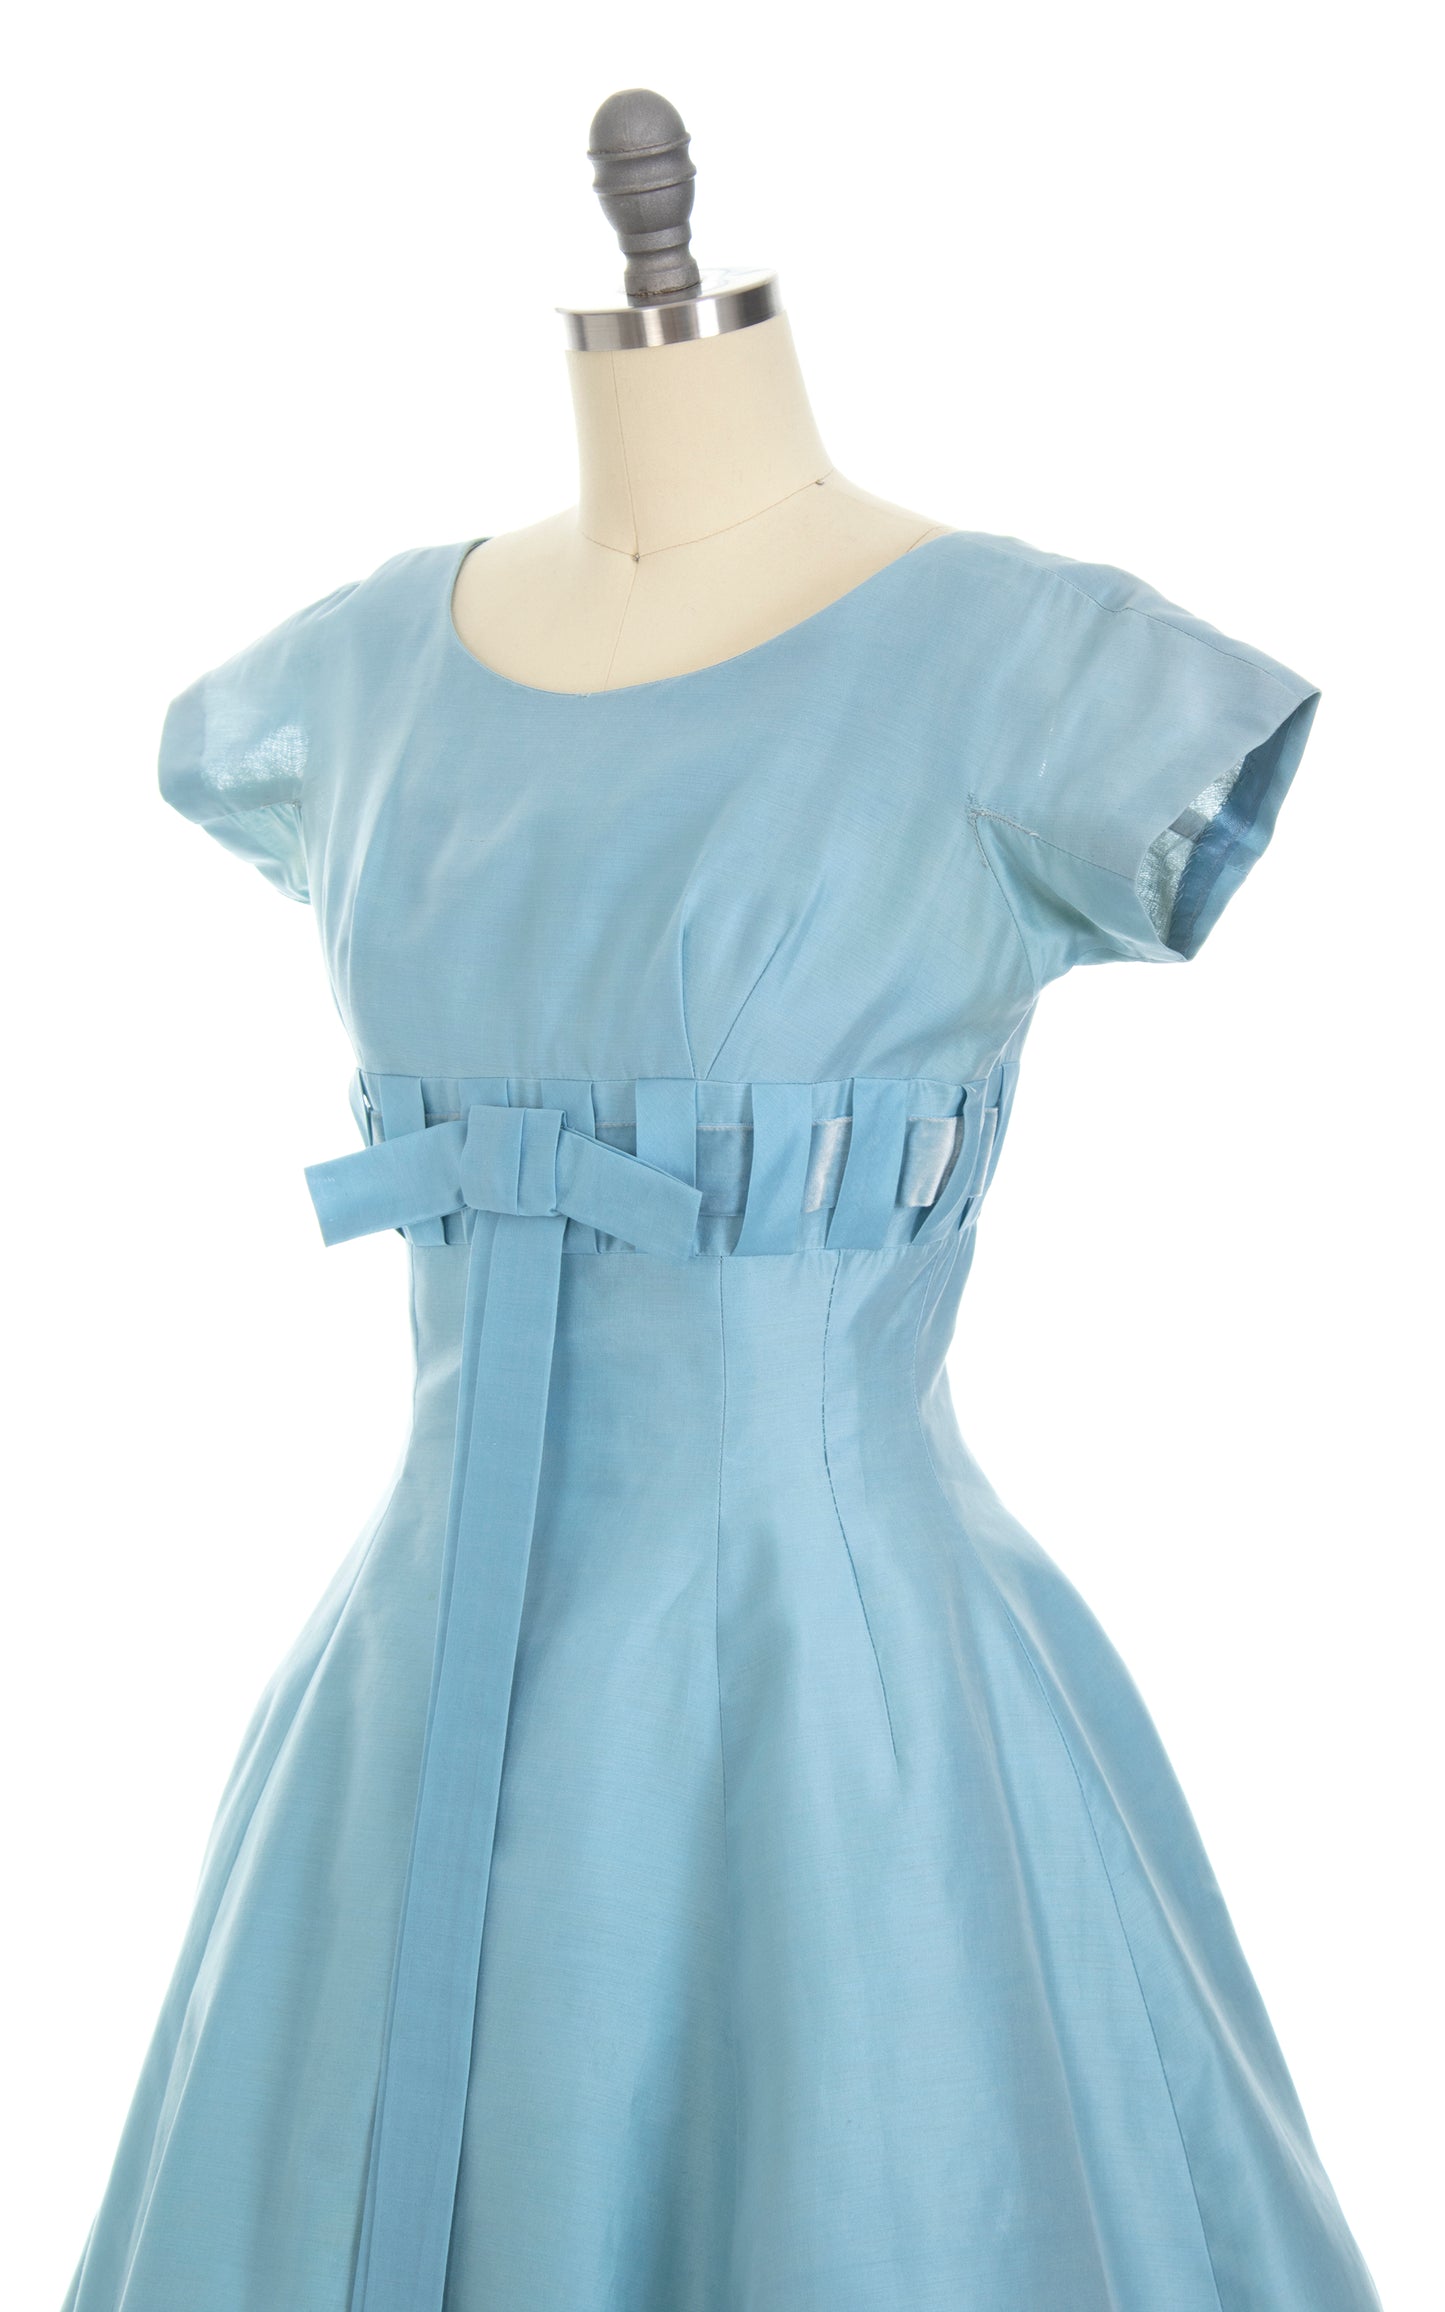 Vintage 1950s 50s Baby Blue Velvet Ribbon Bow Fit and Flare Party Dress Birthday Life Vintage